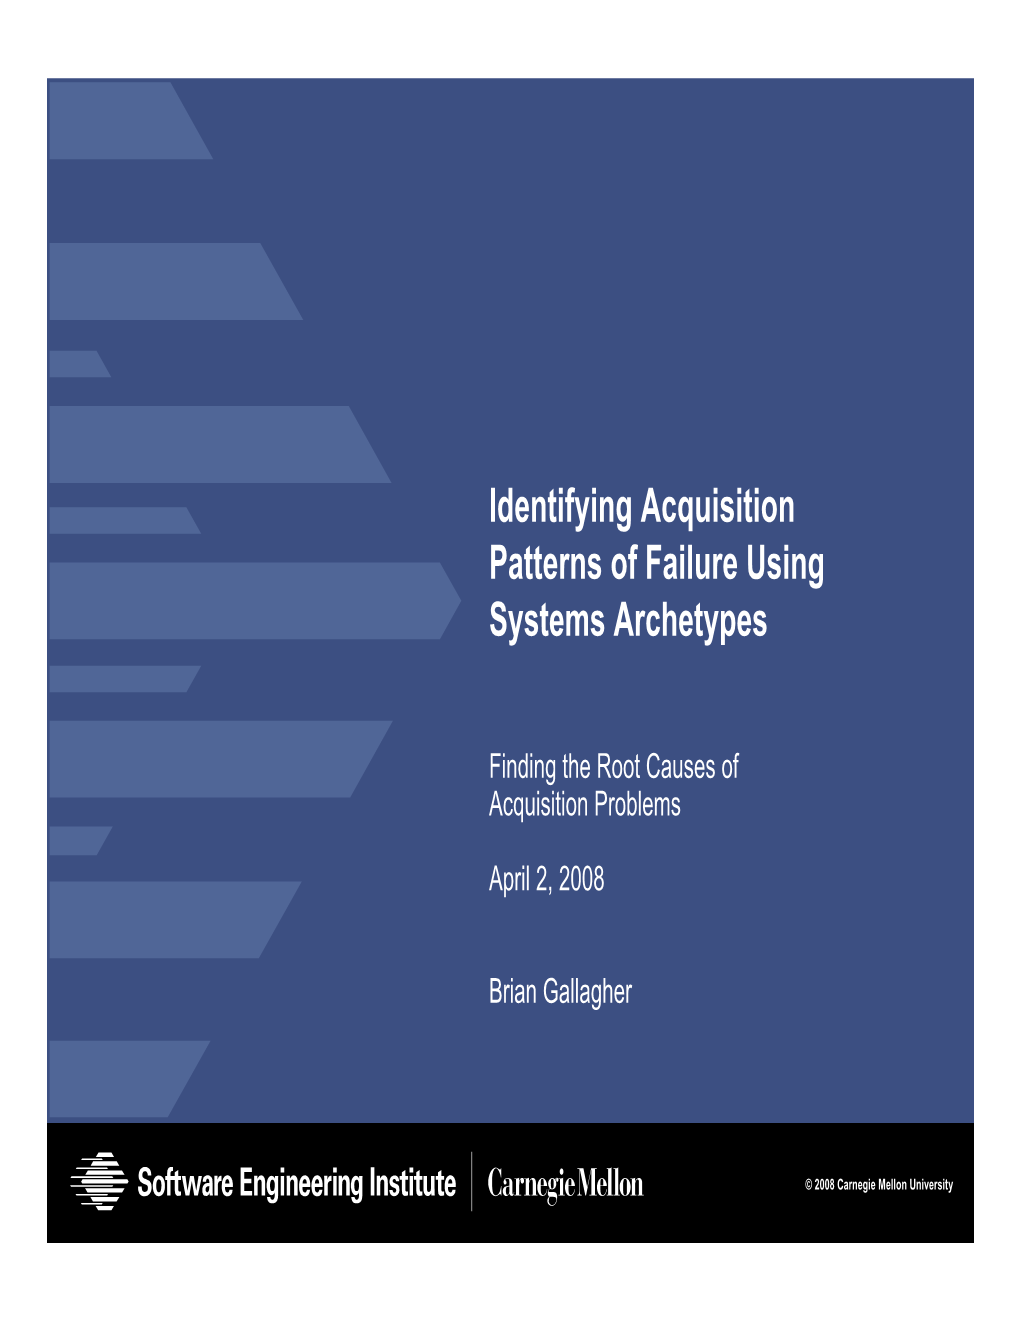 Identifying Acquisition Patterns of Failure Using Systems Archetypes